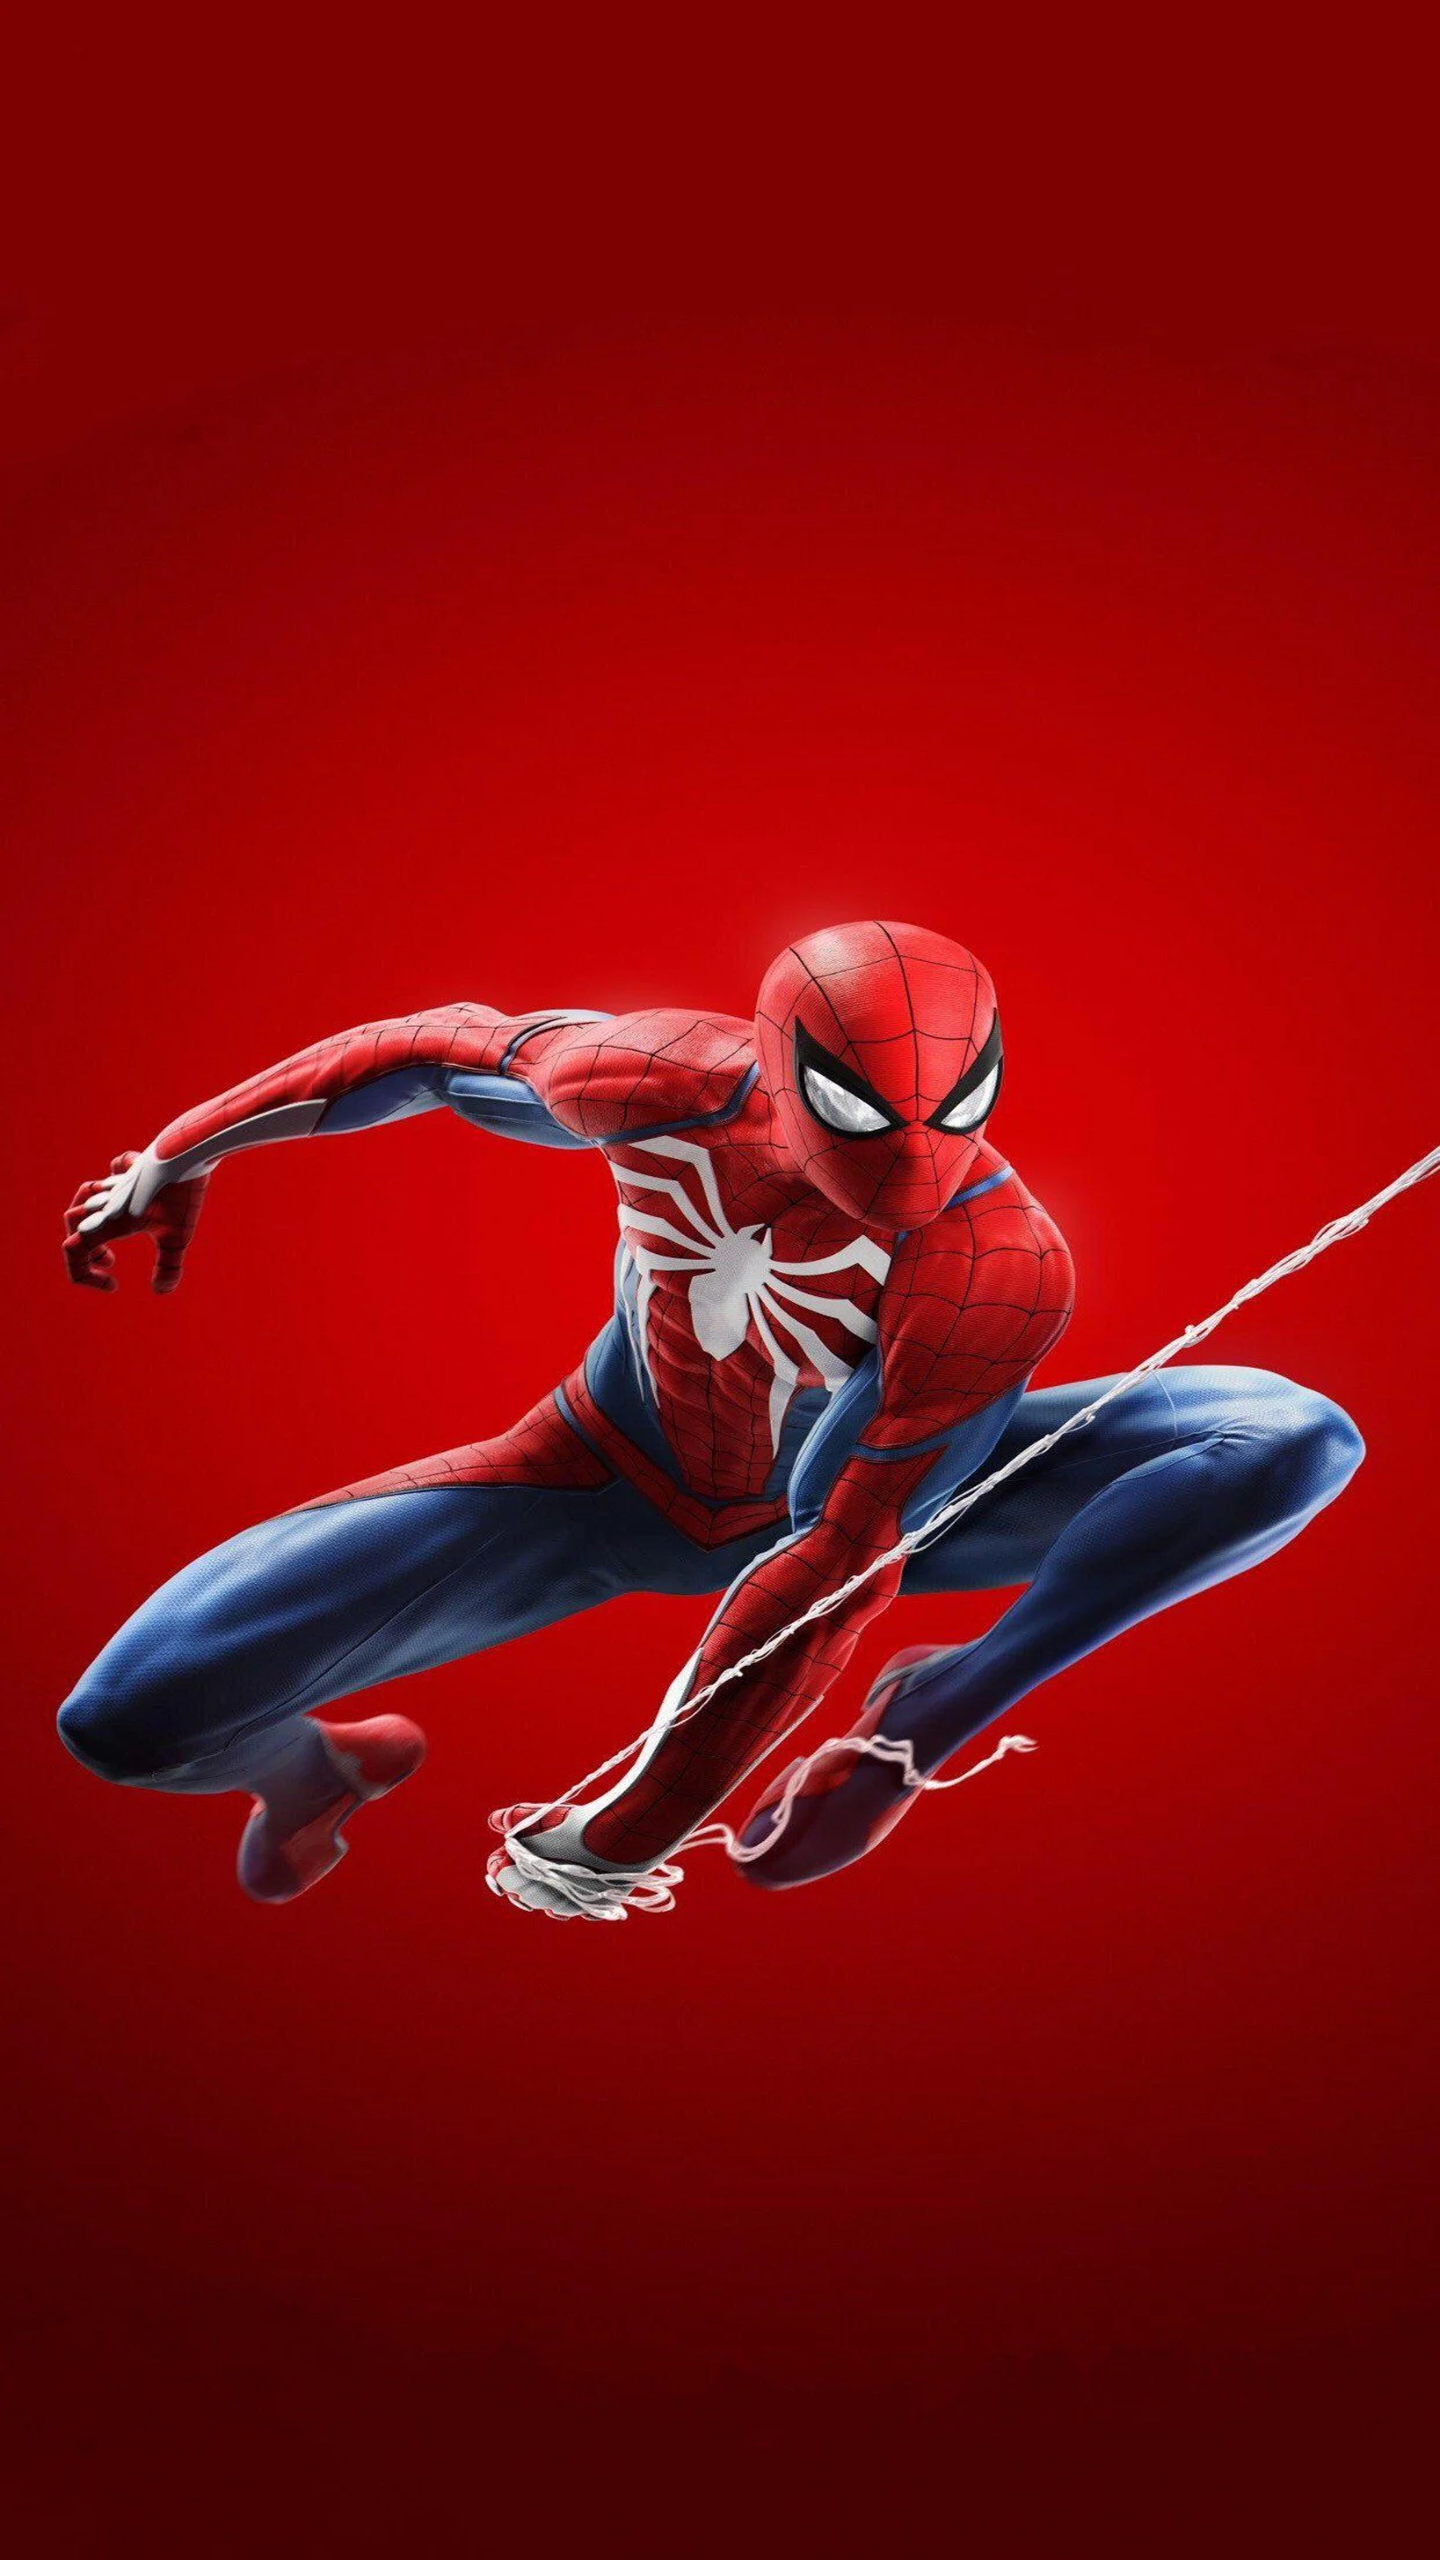 Tải Amazing SpiderMan 2 Live WP for Android 201  Live wallpaper người  nhện 2 trên Android  Downvn